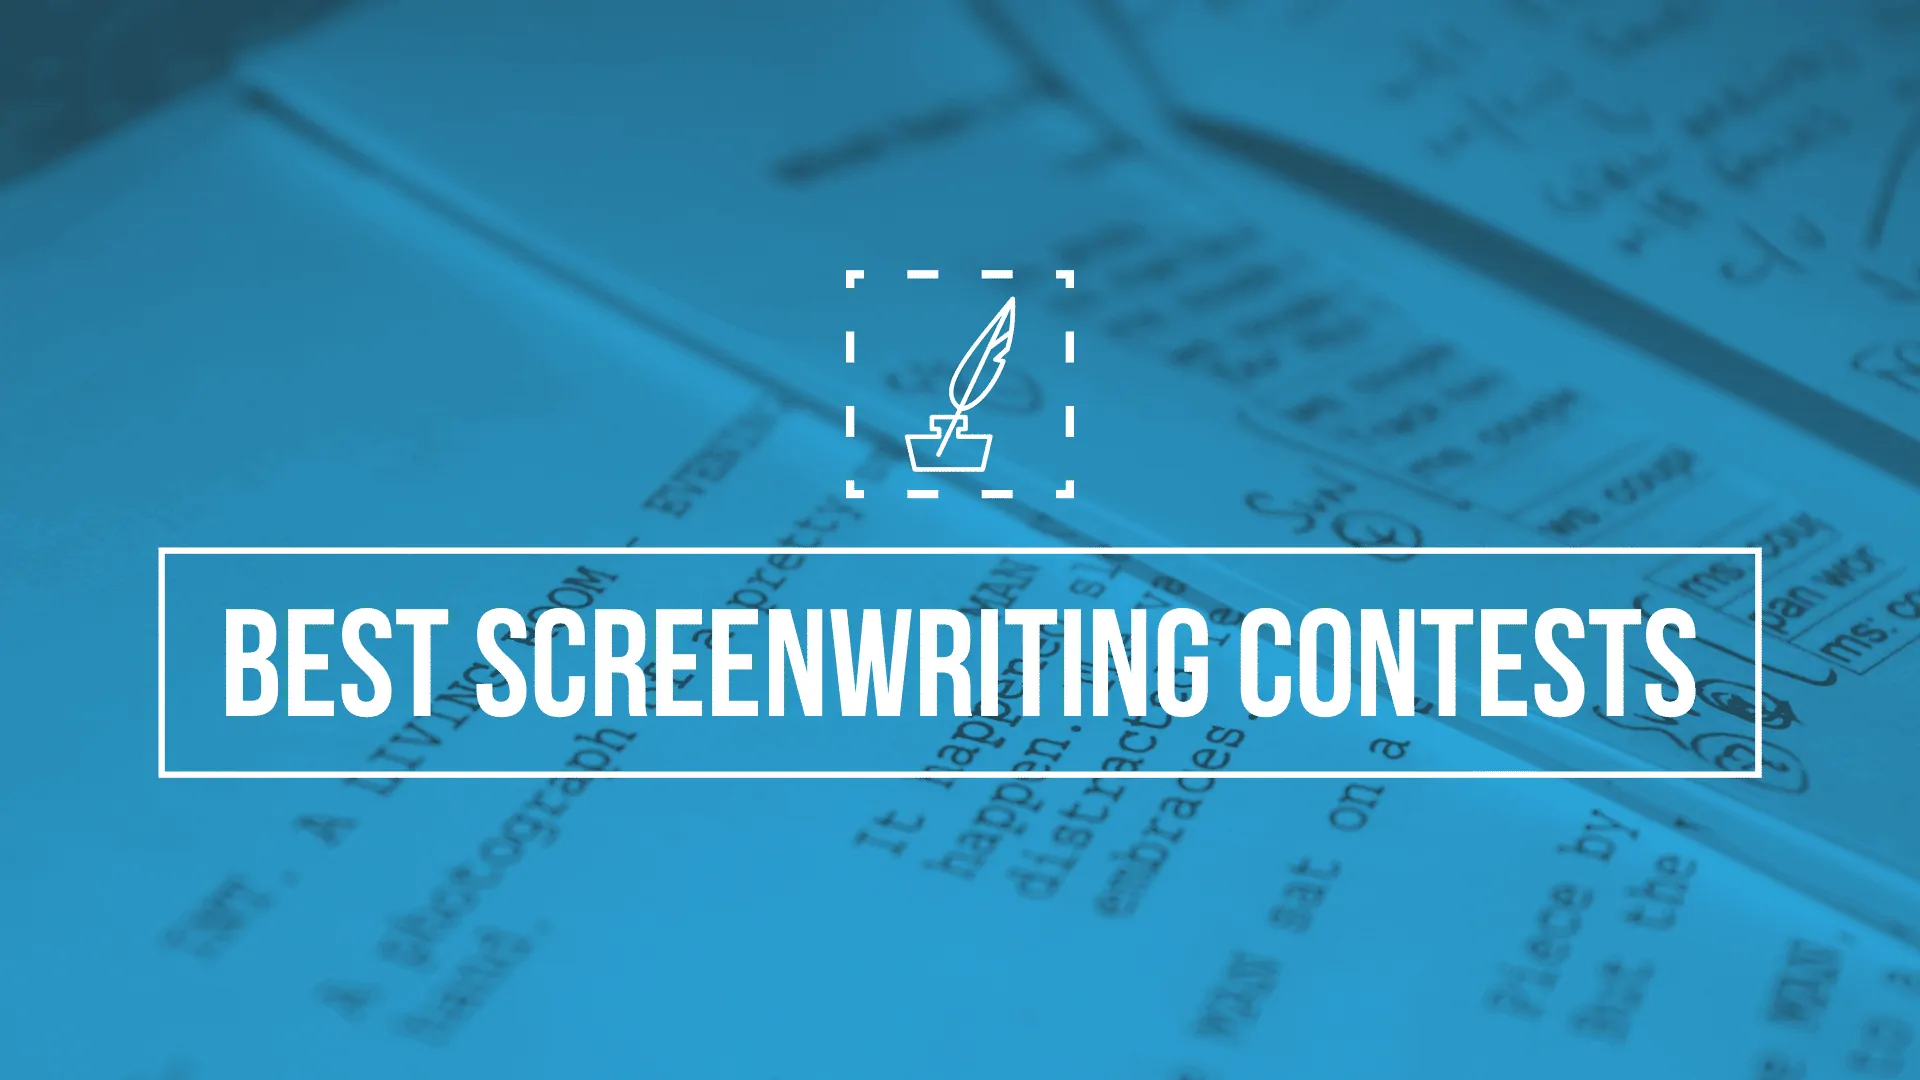 Best-Screenwriting-Contests-2020-Scriptation